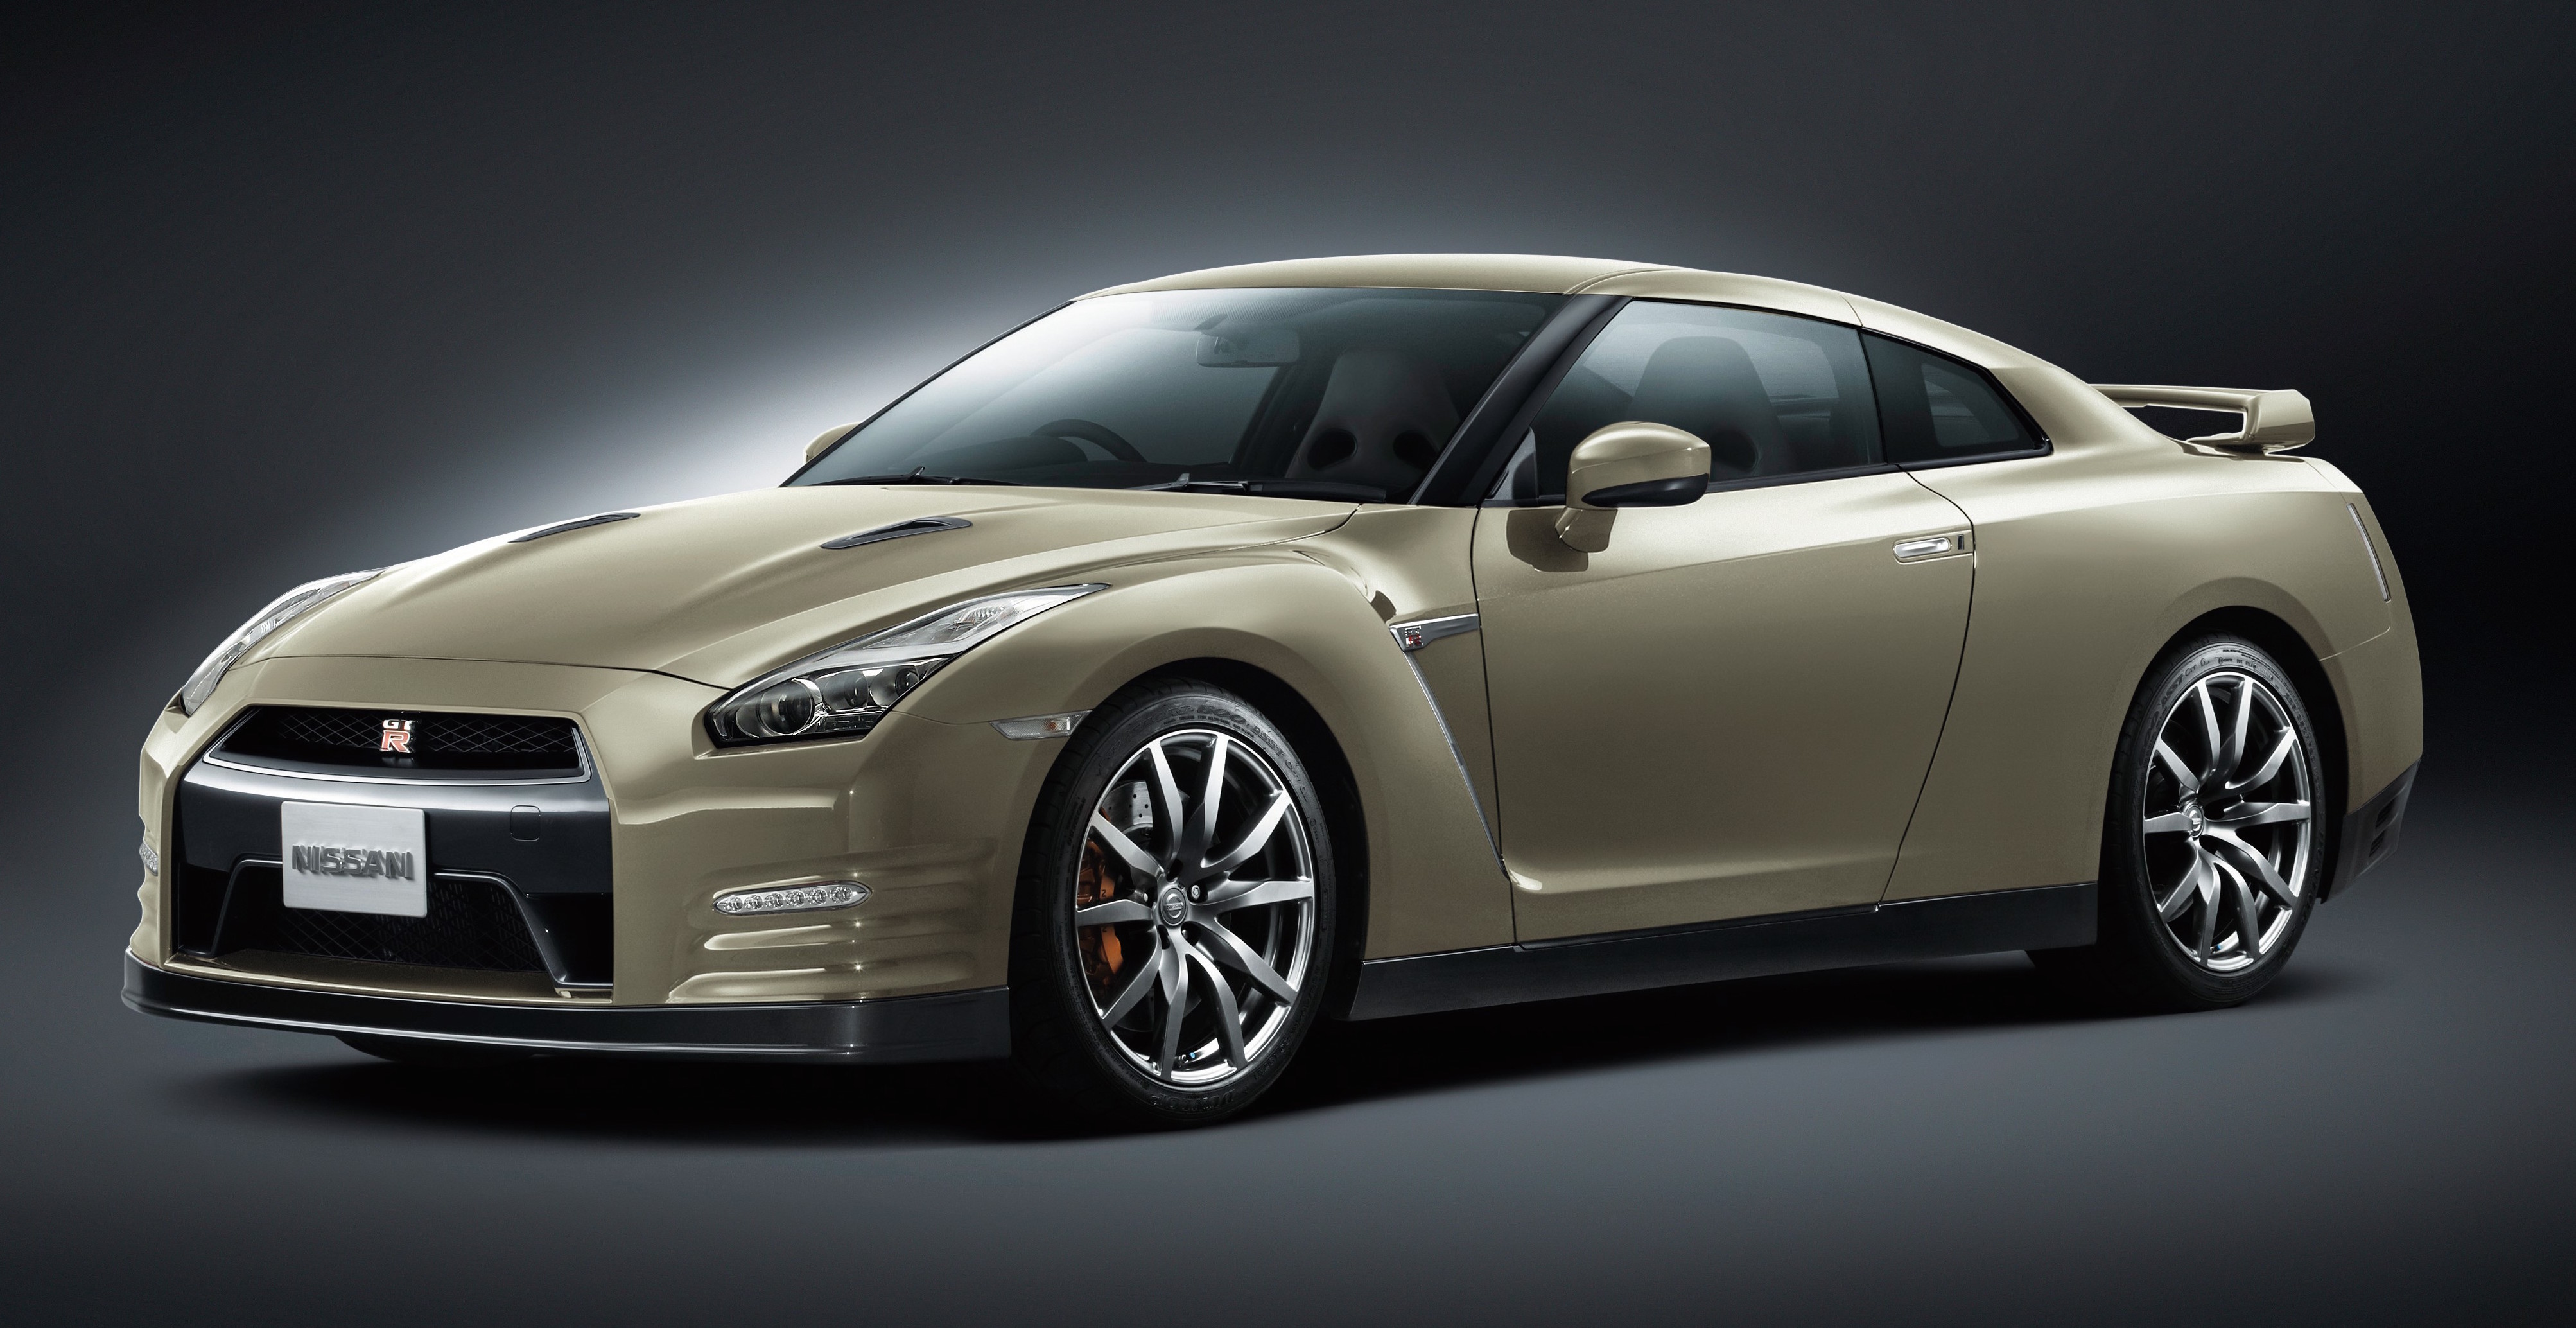 2015 Nissan GTR the R35 gets updated yet again, limited